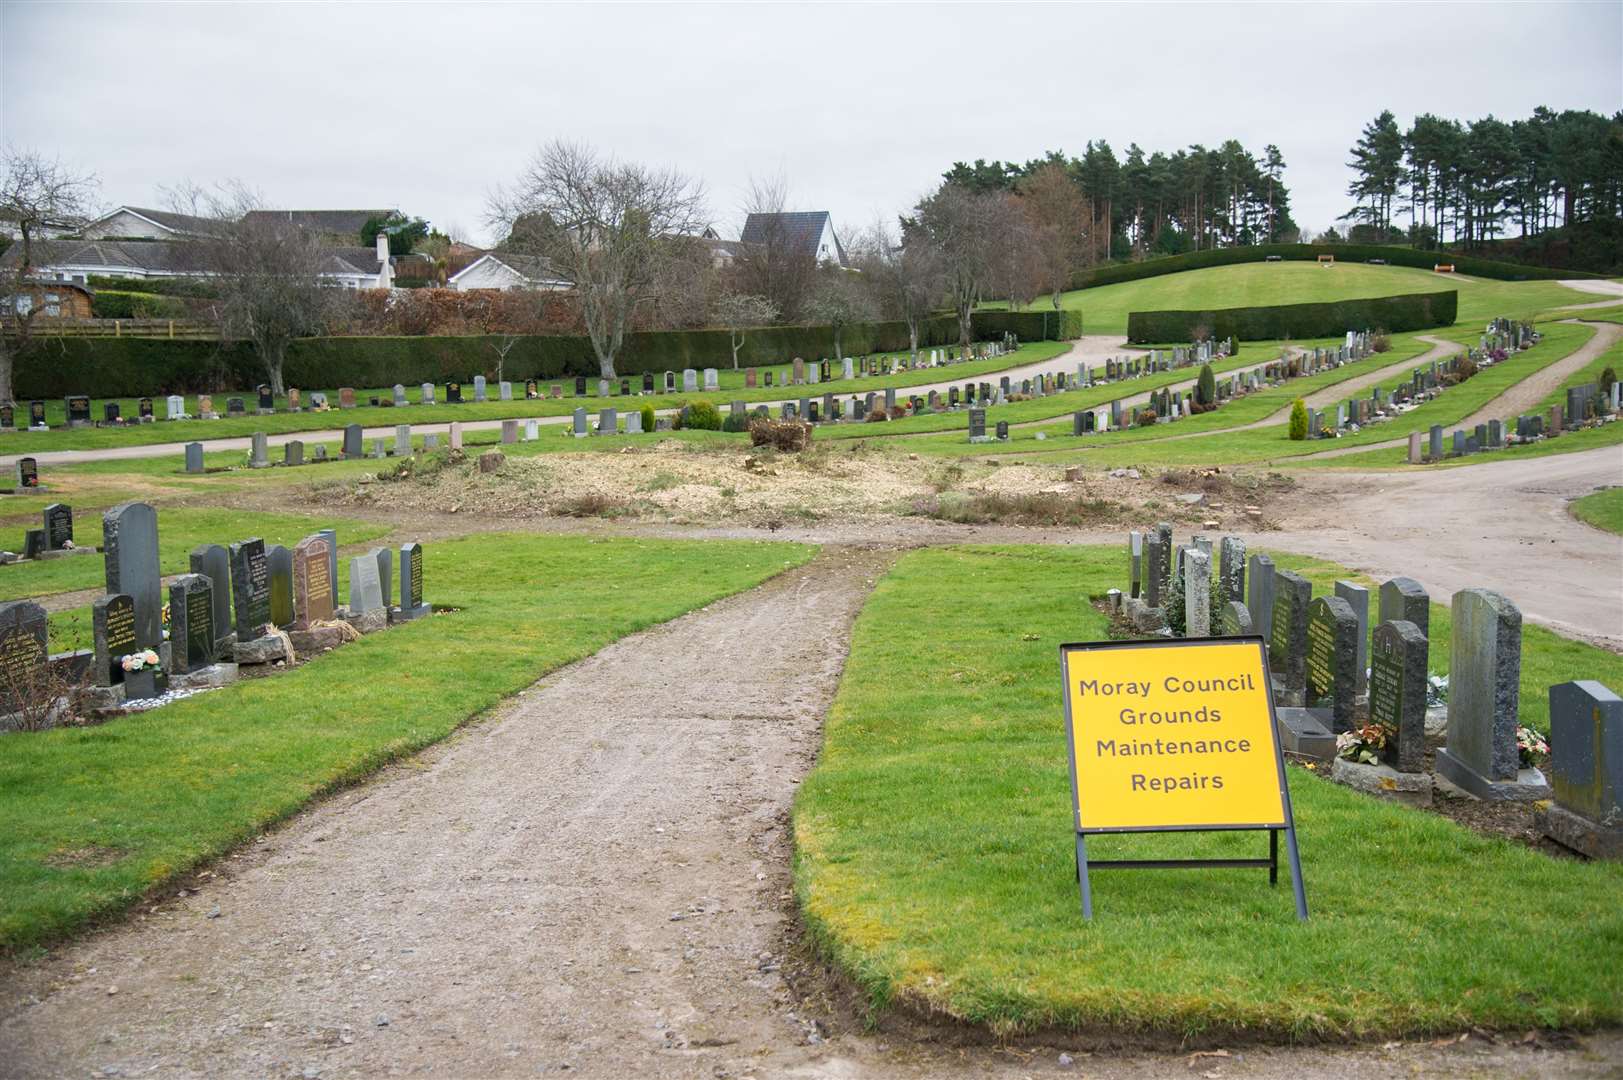 Site clearance in advance of the anticipated drainage solution will prevent birds from nesting and potentially delaying the work. Moray Council's team will put in replacement trees around the perimeter of the cemetery during the winter.